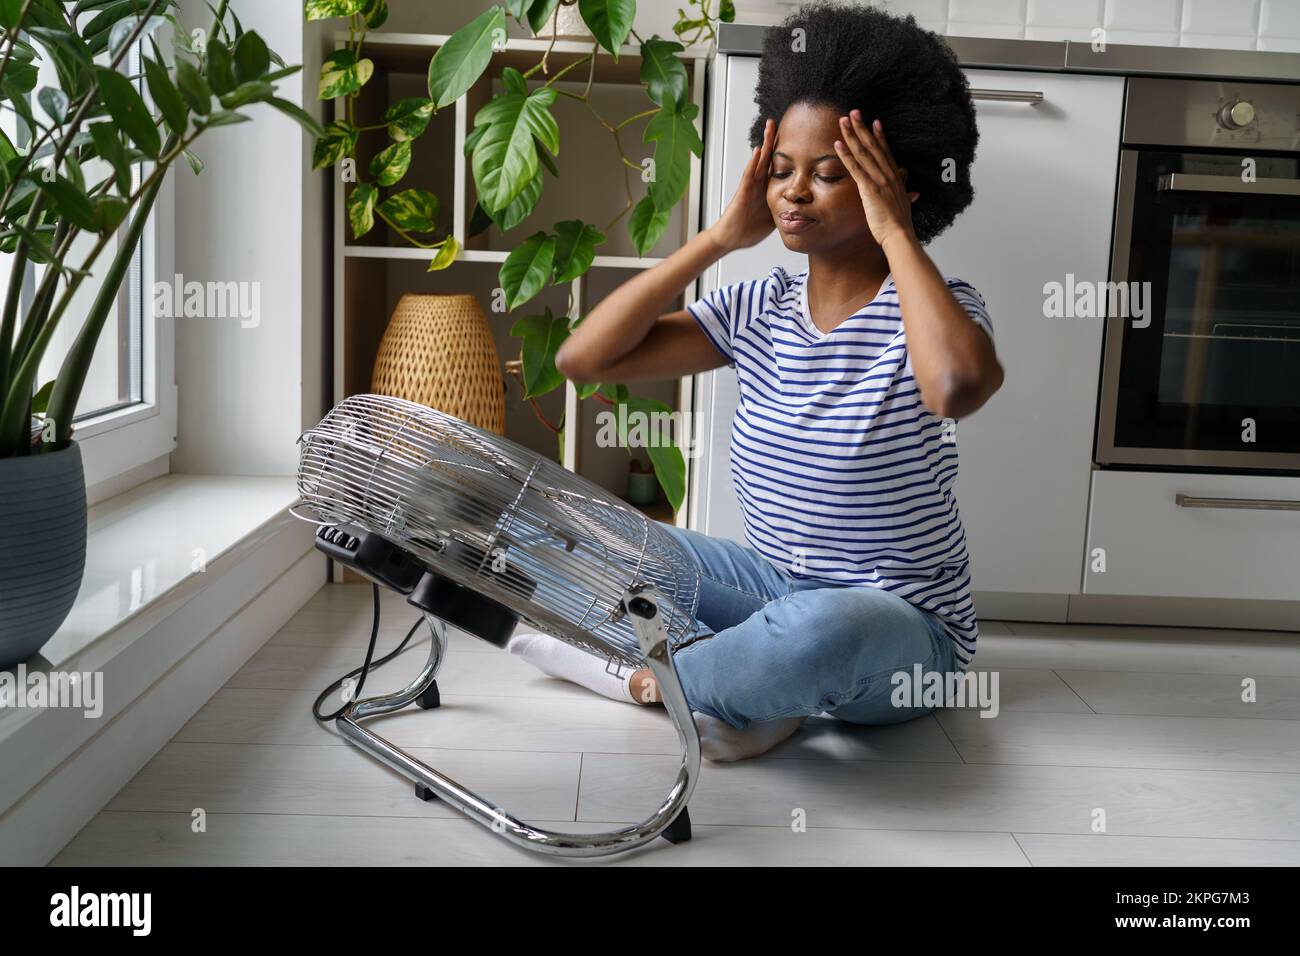 African woman suffering from heat at home, using electric fan for cooling during hot weather Stock Photo